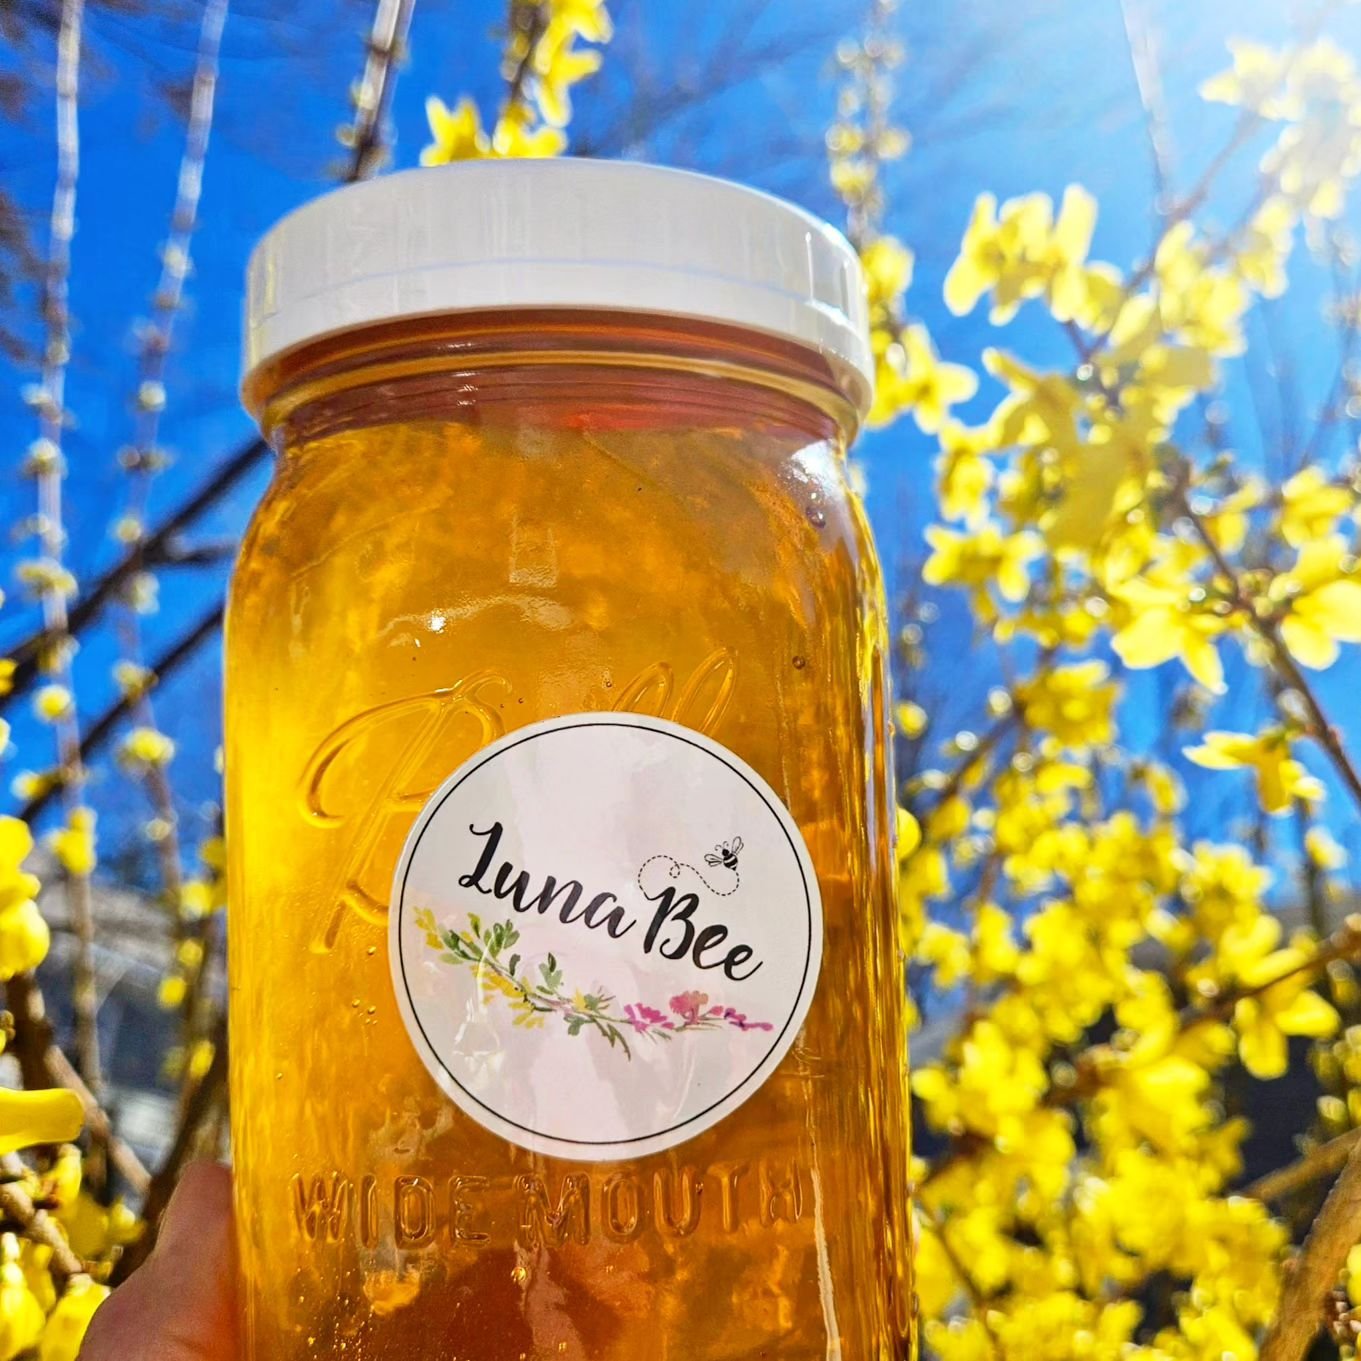 Is that really you SPRING?!
Picked up some amazing @lunabeeco HONEY!!
It might just be THYME for a collab.....
MARKET SEASON is upon us &amp; in just a short couple weeks we'll be out there in the sun sipping on some LEMONADE 🐝🍯🌿🍋☀️🌷❤️🎉
Stay tu